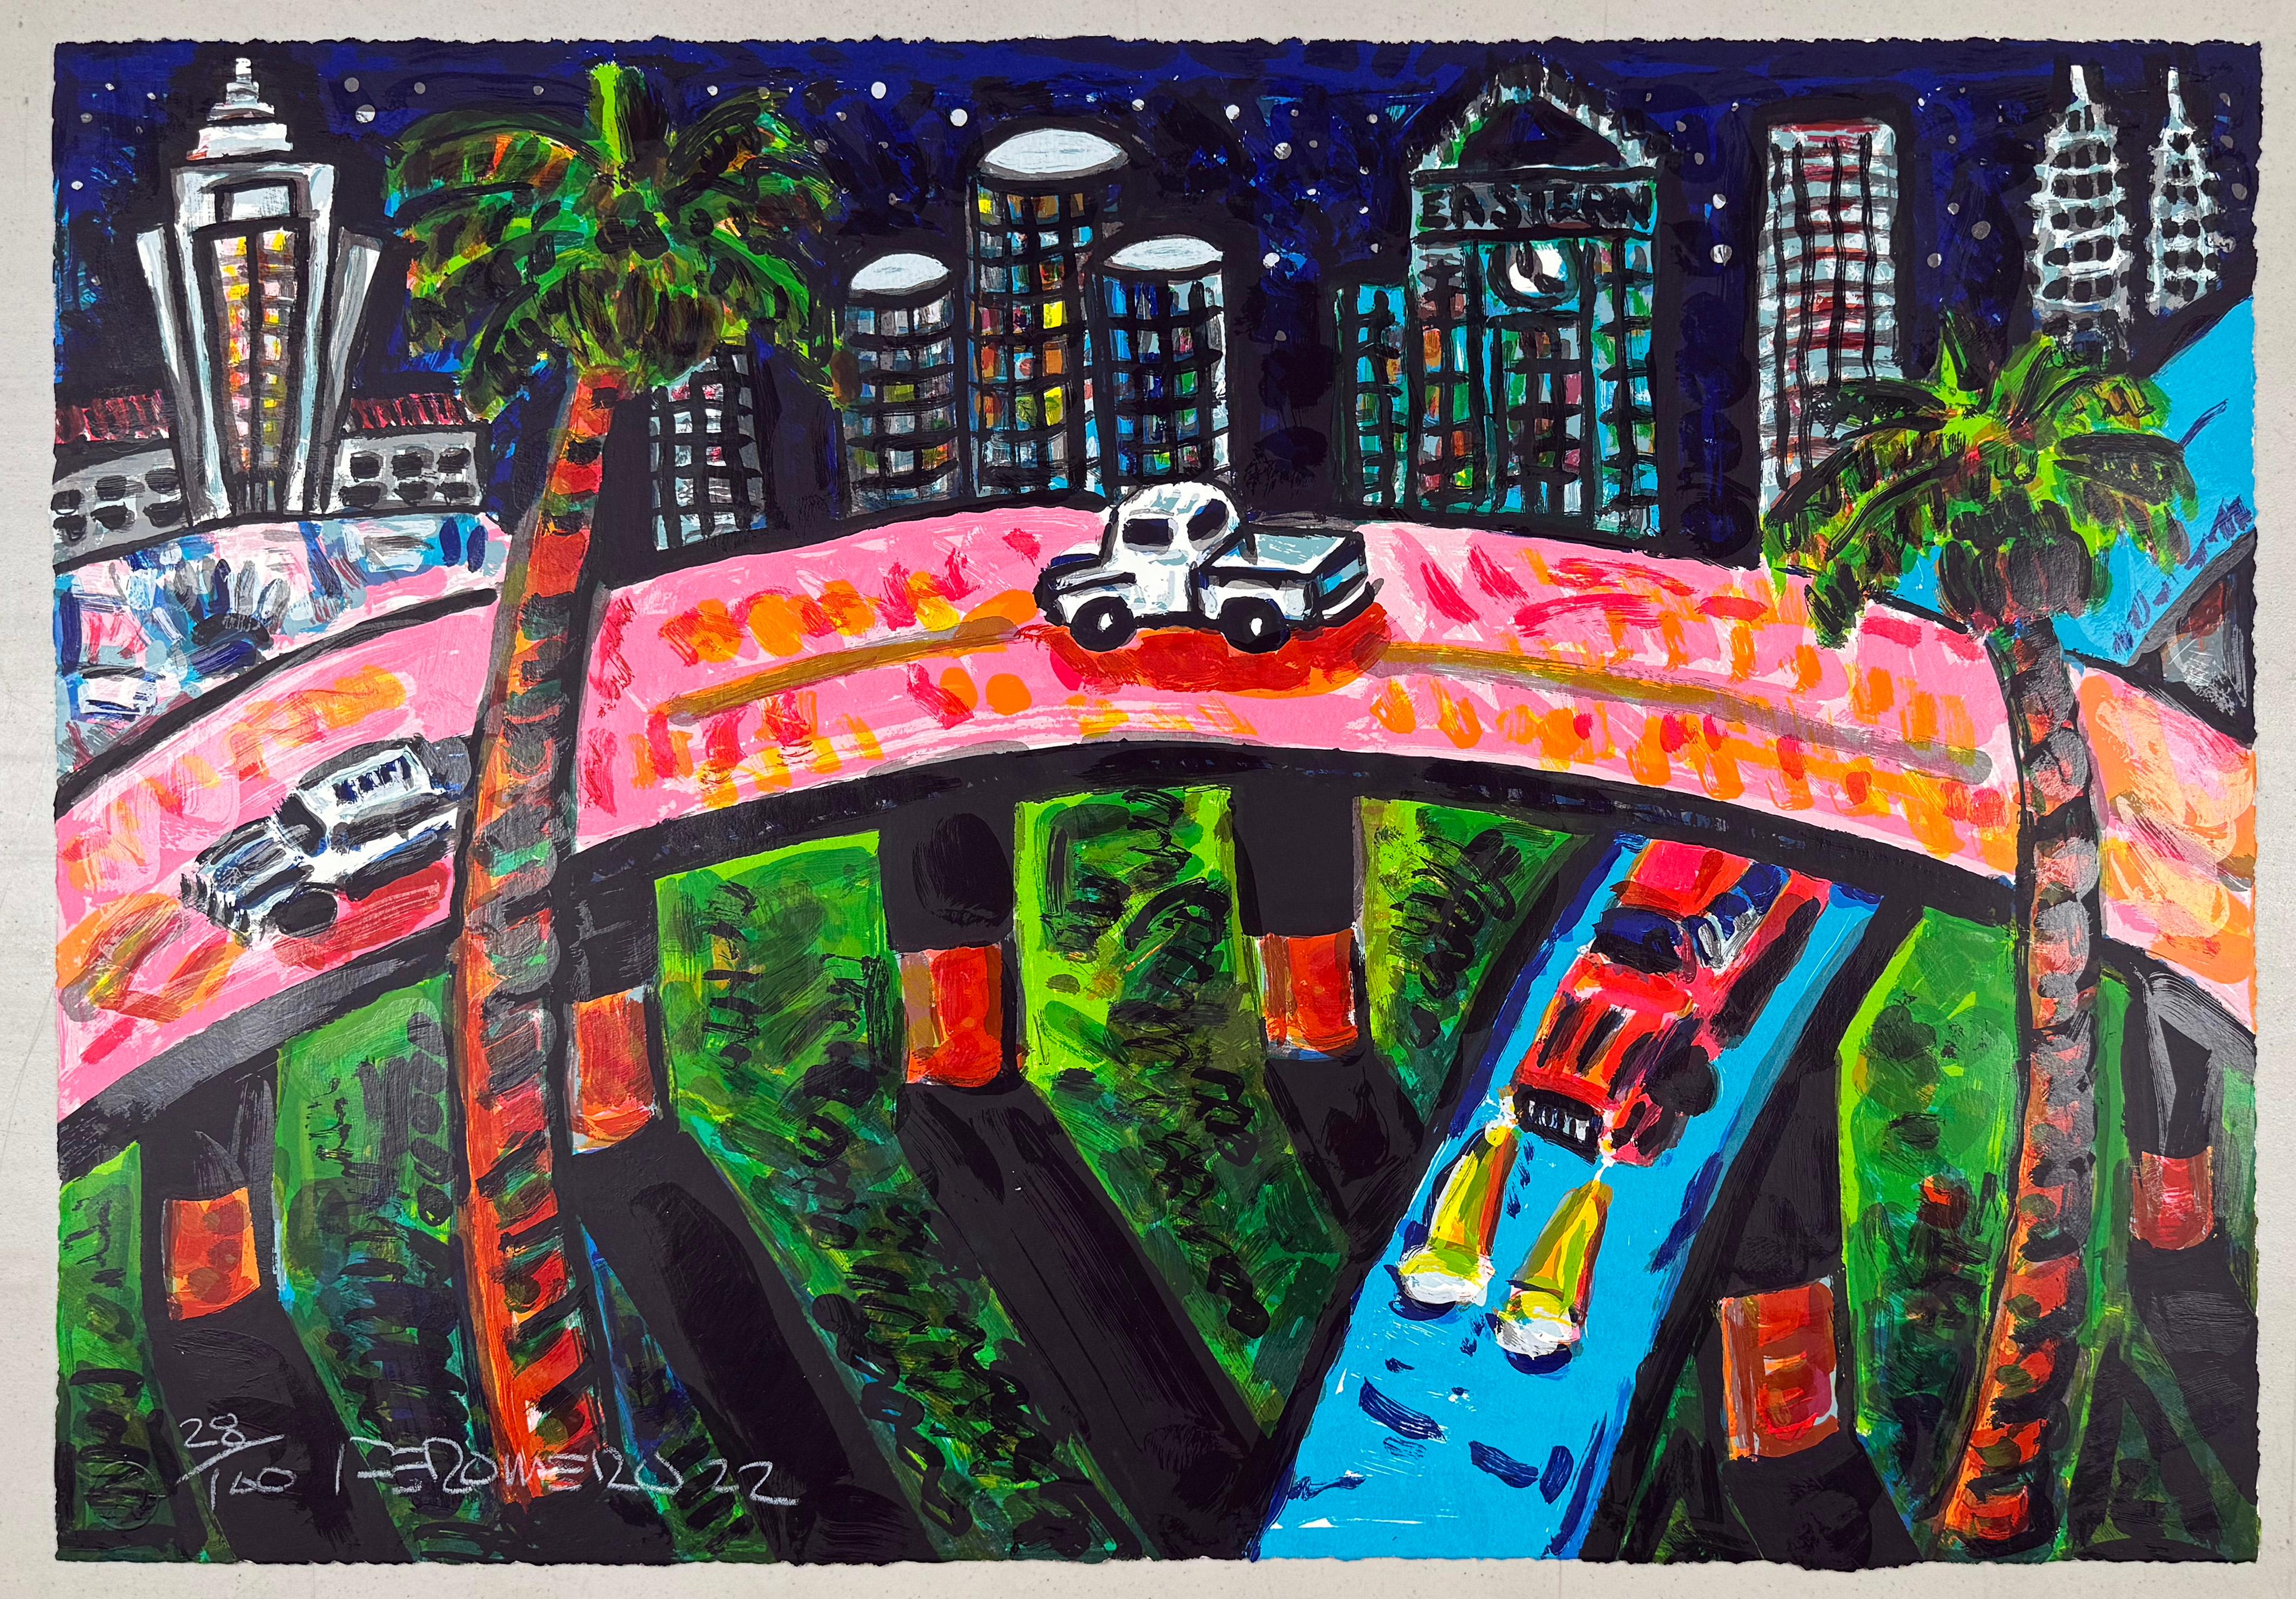 Medium: Serigraph
Image Size: 22 x 32 inches
Year: 1989
Edition: 140

This is an early print from 1989, featuring the view of cars on an overpass at night, against the backdrop of downtown Los Angeles. 

Throughout his 40 year career as an artist,